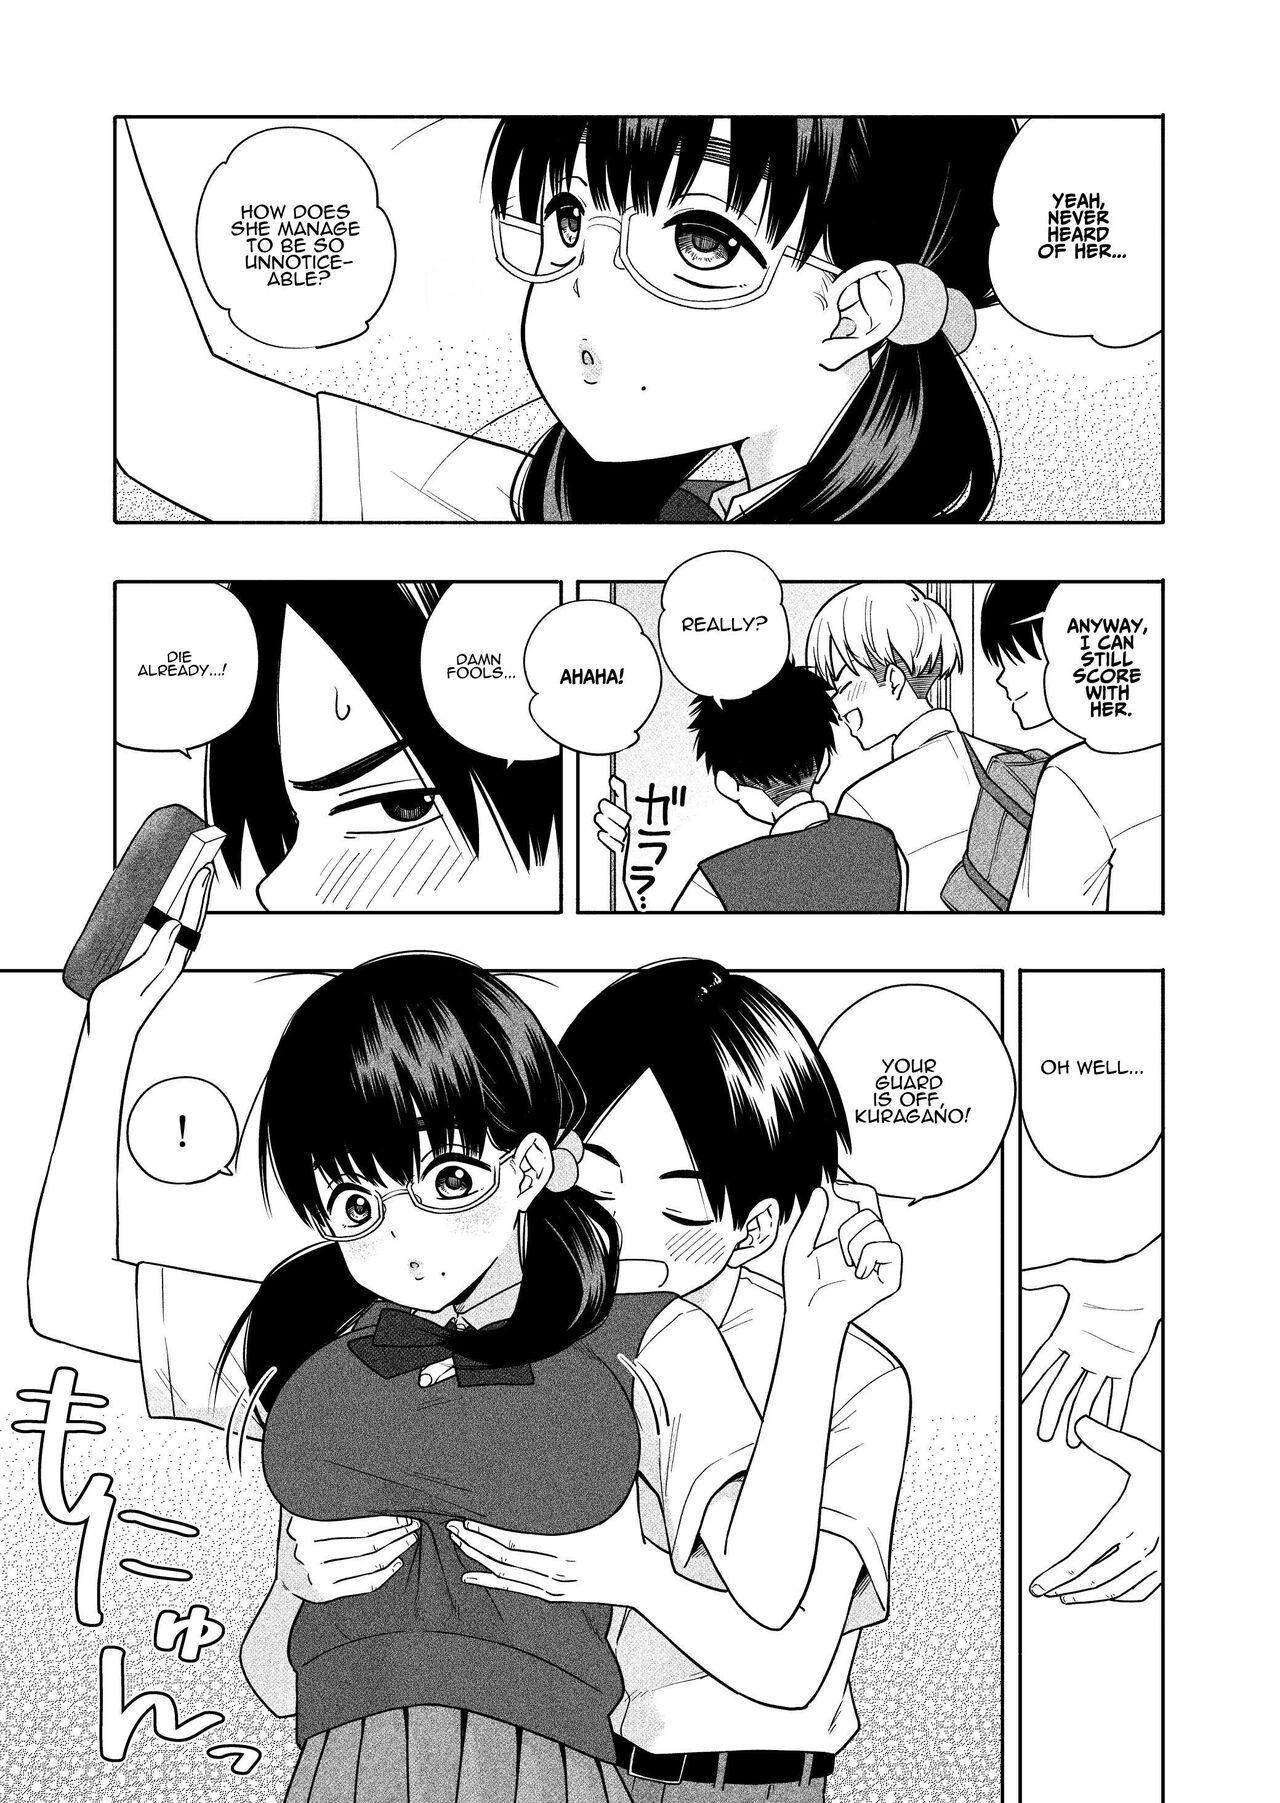 Hot Sluts Hoshikute, Motomete. | I want, and I yearn for. - Original Rough Sex - Page 5